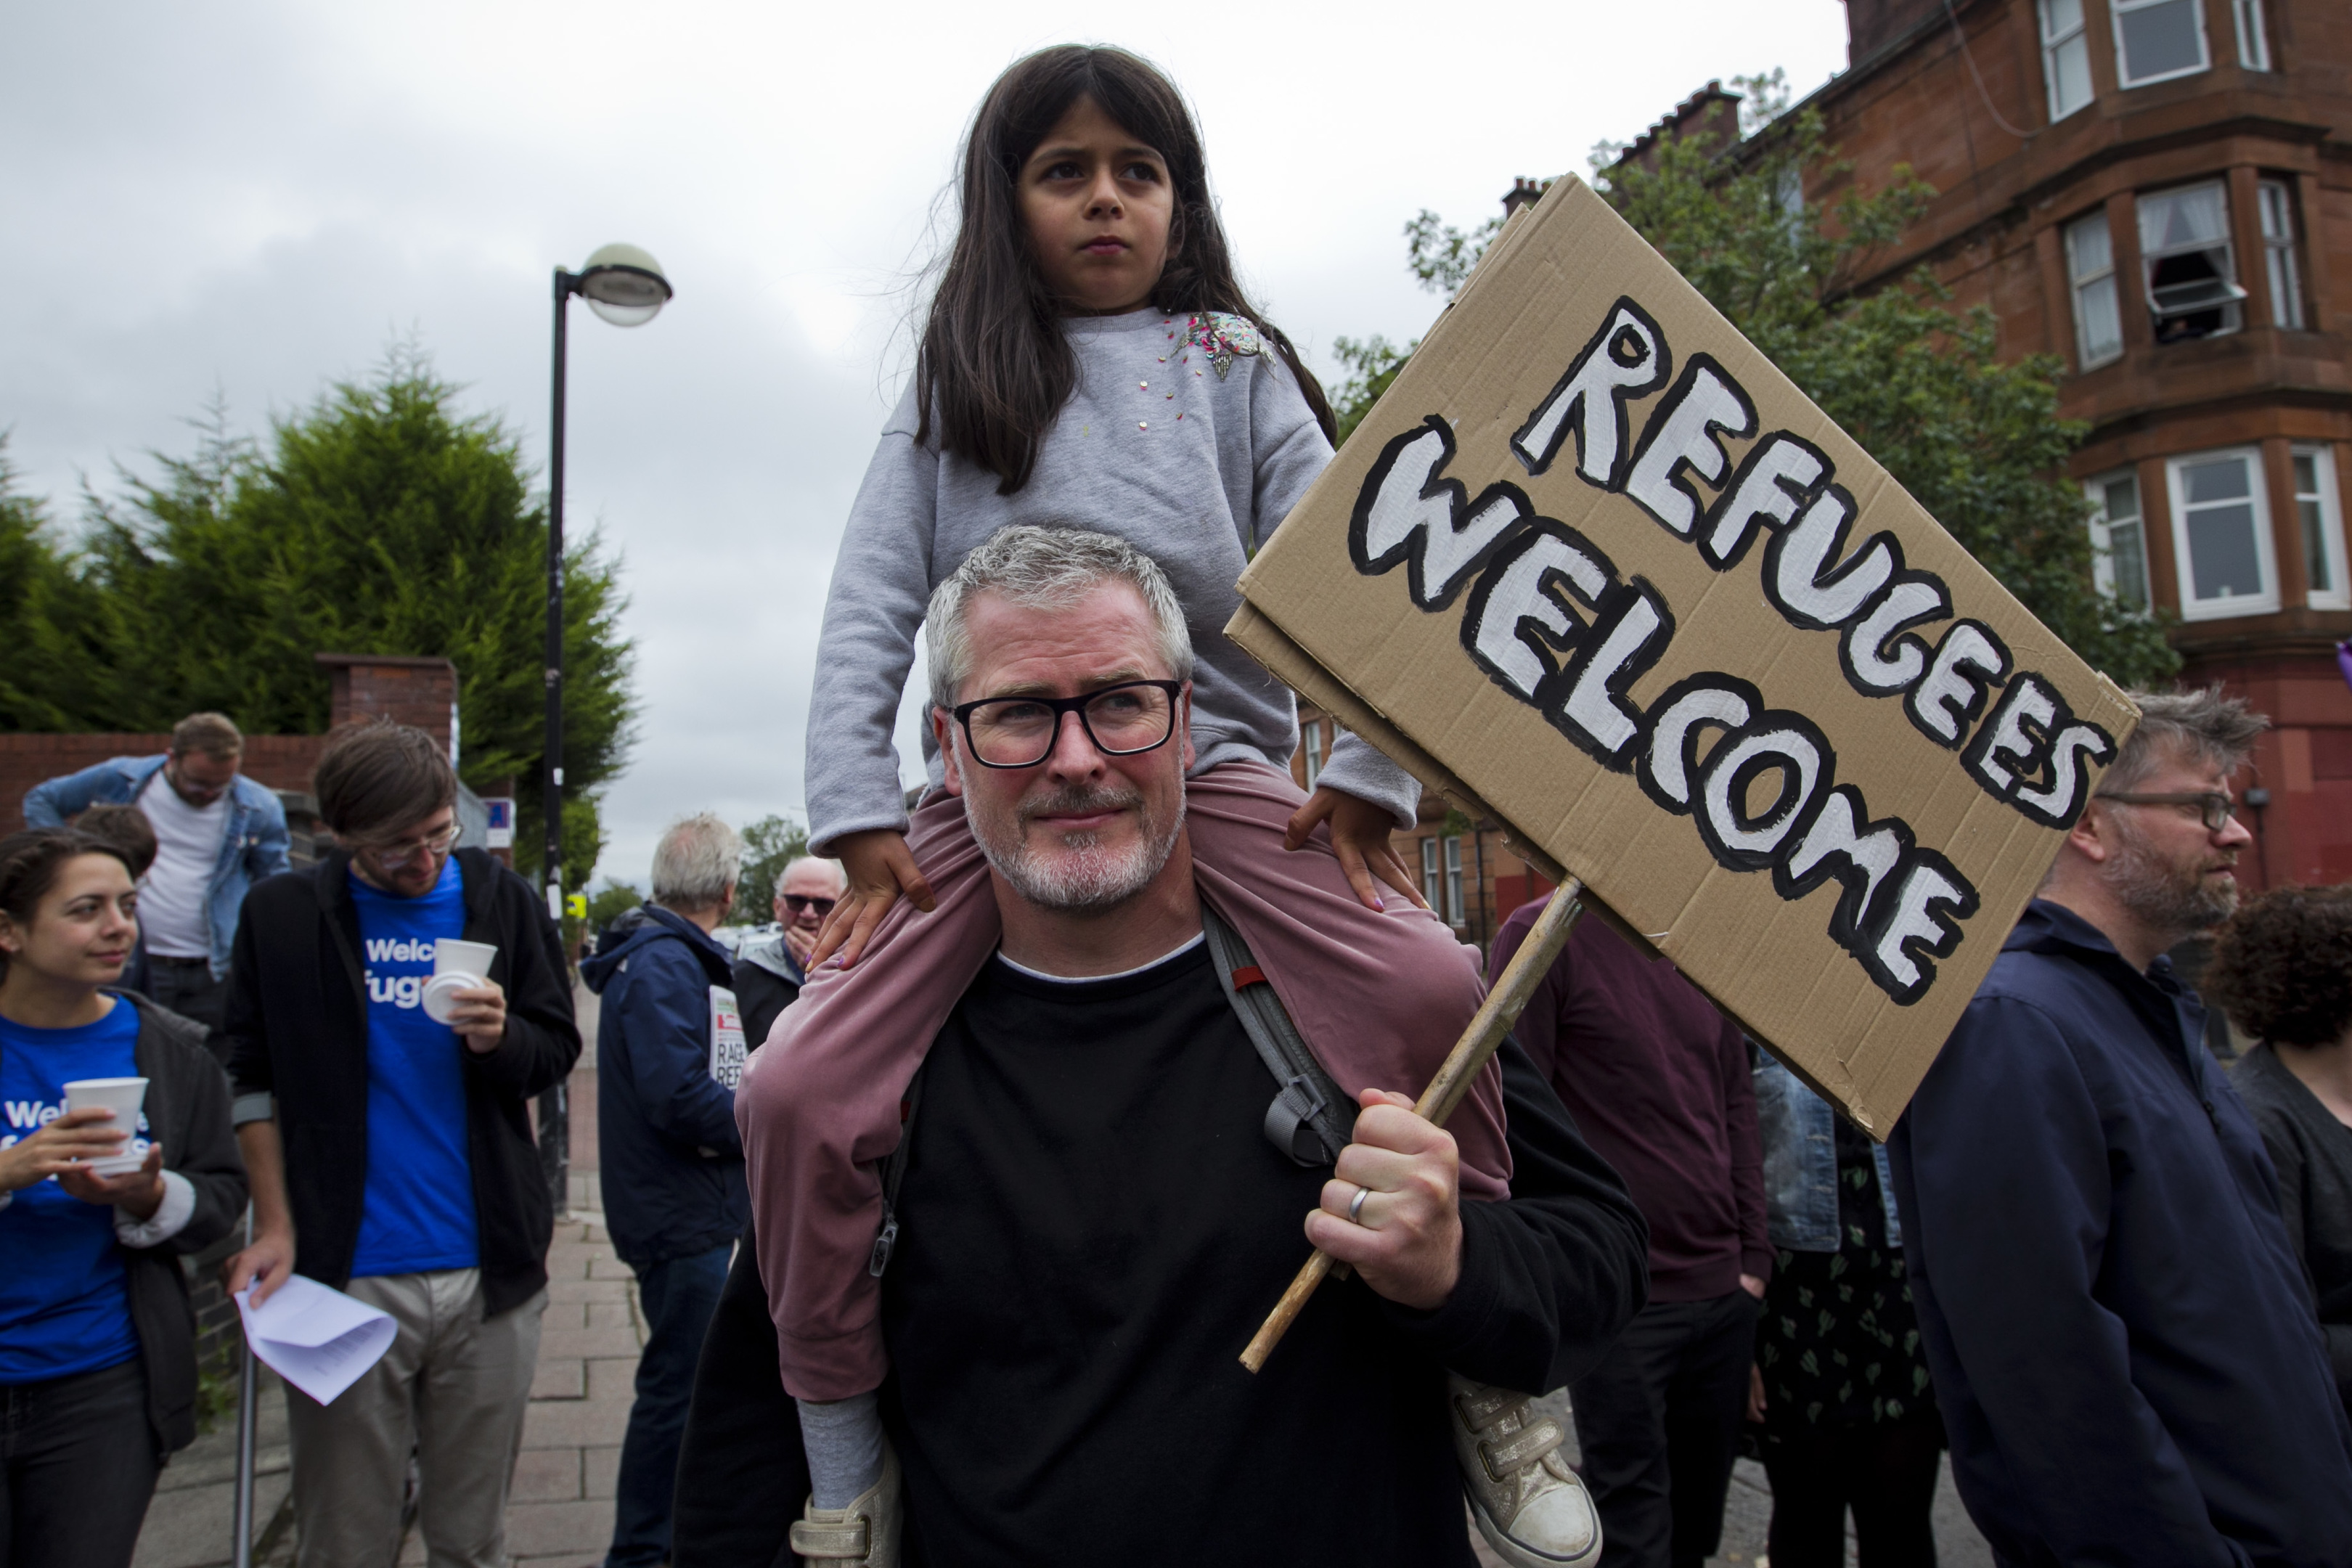 A demonstration outside the Home Office building in Glasgow (Andrew Cawley / DC Thomson)